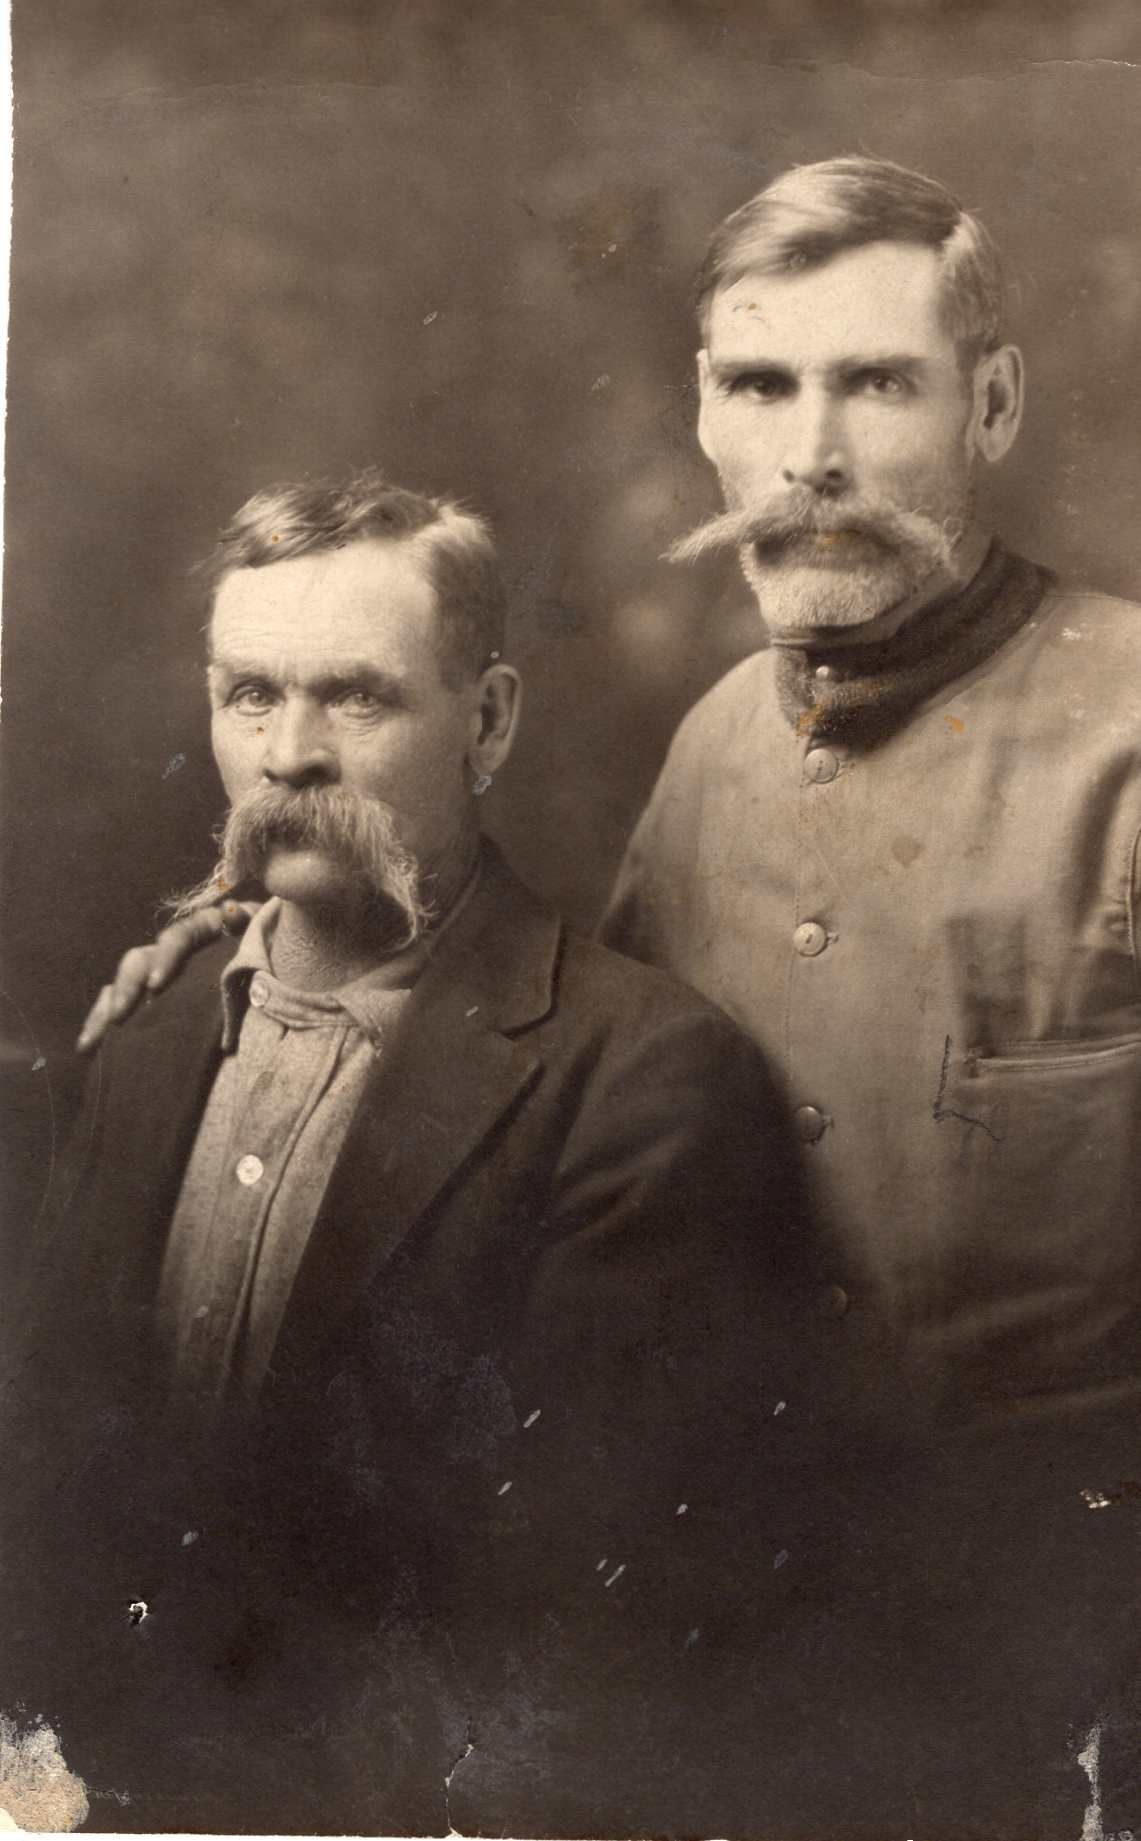 Brothers George and Charles Marlow of Ouray County